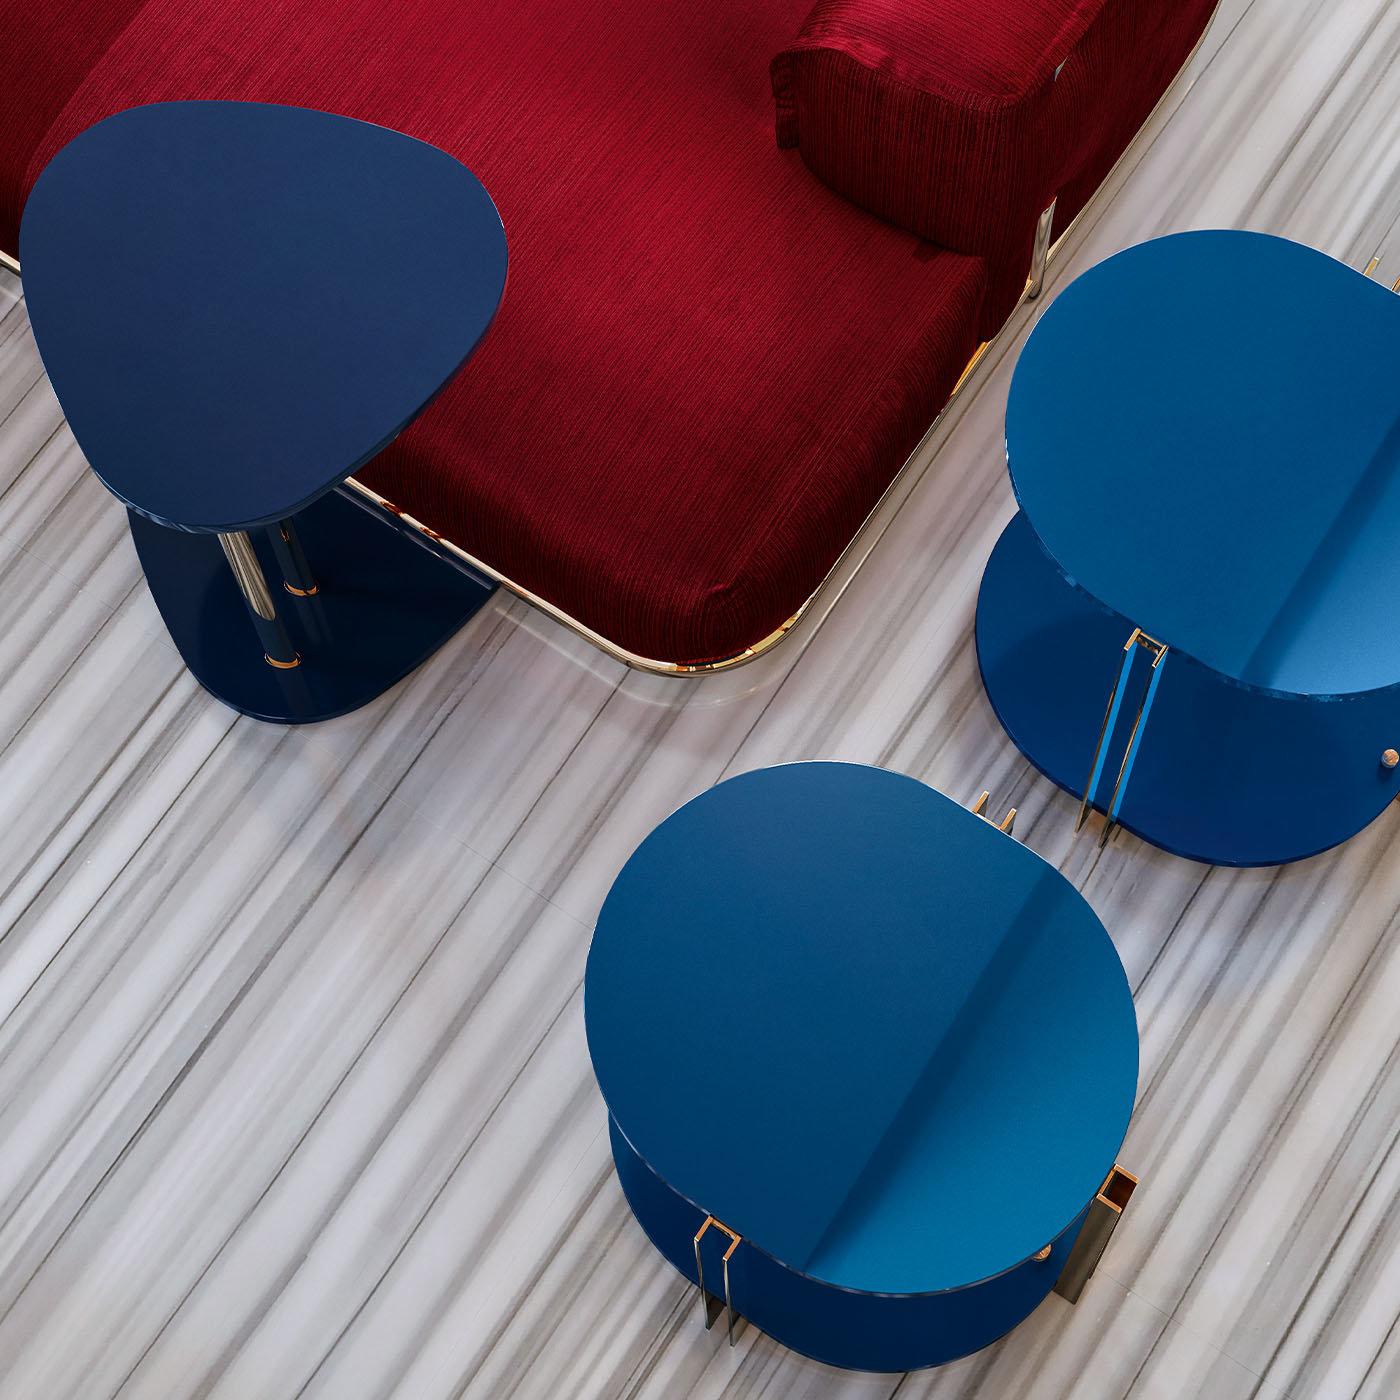 Offering a captivating cantilever construction, the Marlene Side Table sports identical drop-shaped top and base of lacquered plywood connected by two chrome-plated brass cylindrical bars. Perfect for a contemporary office lounge or living room, the